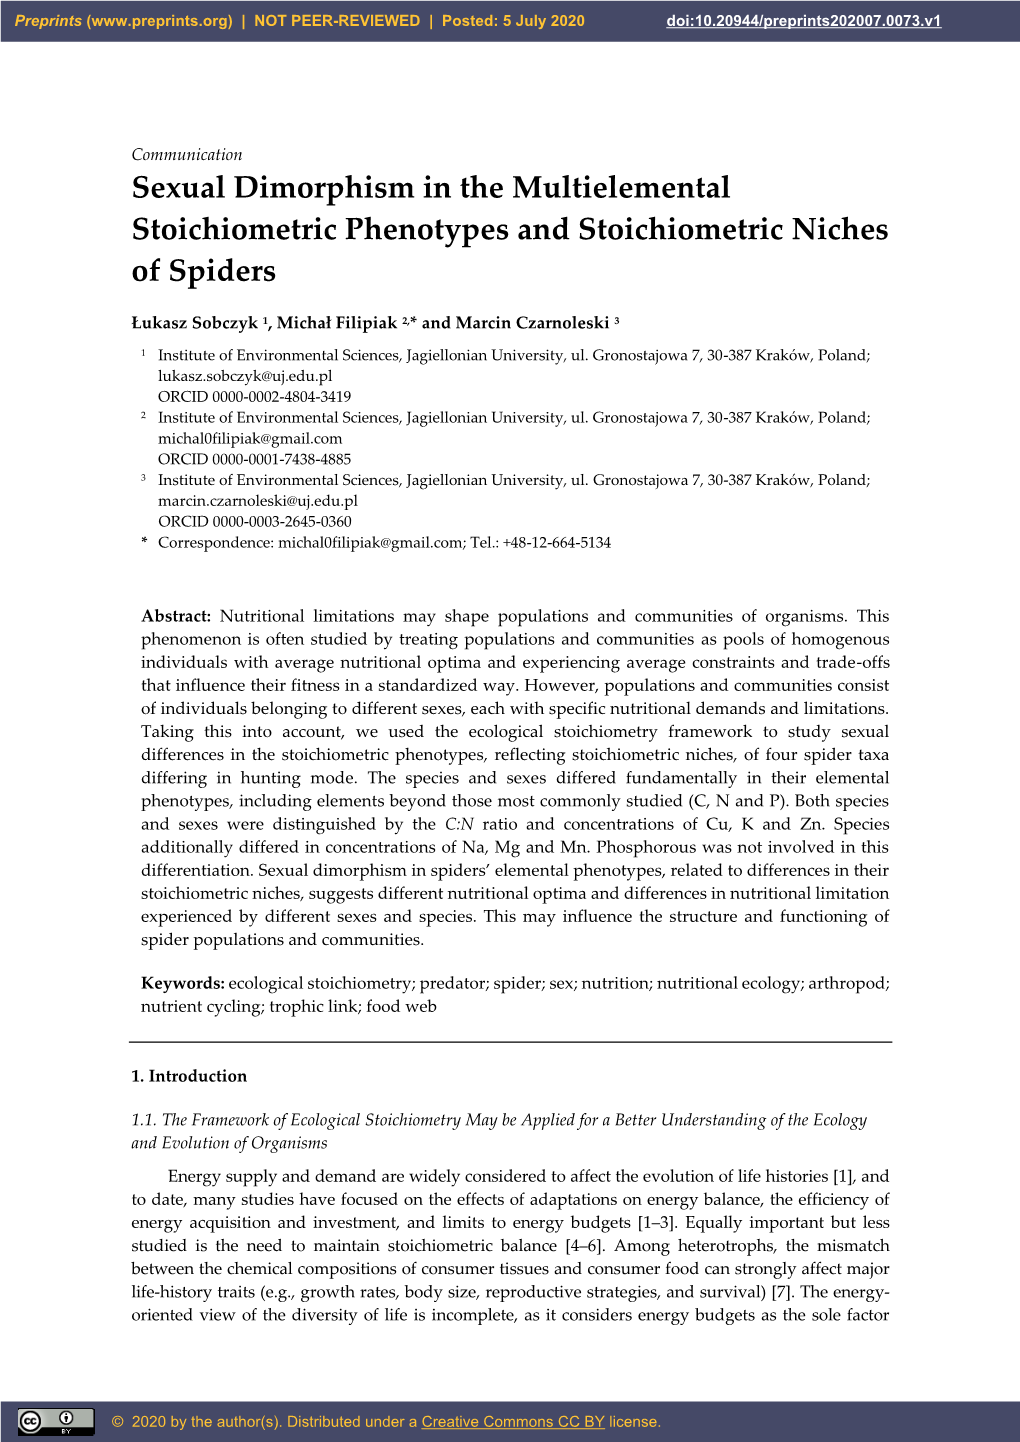 Sexual Dimorphism in the Multielemental Stoichiometric Phenotypes and Stoichiometric Niches of Spiders